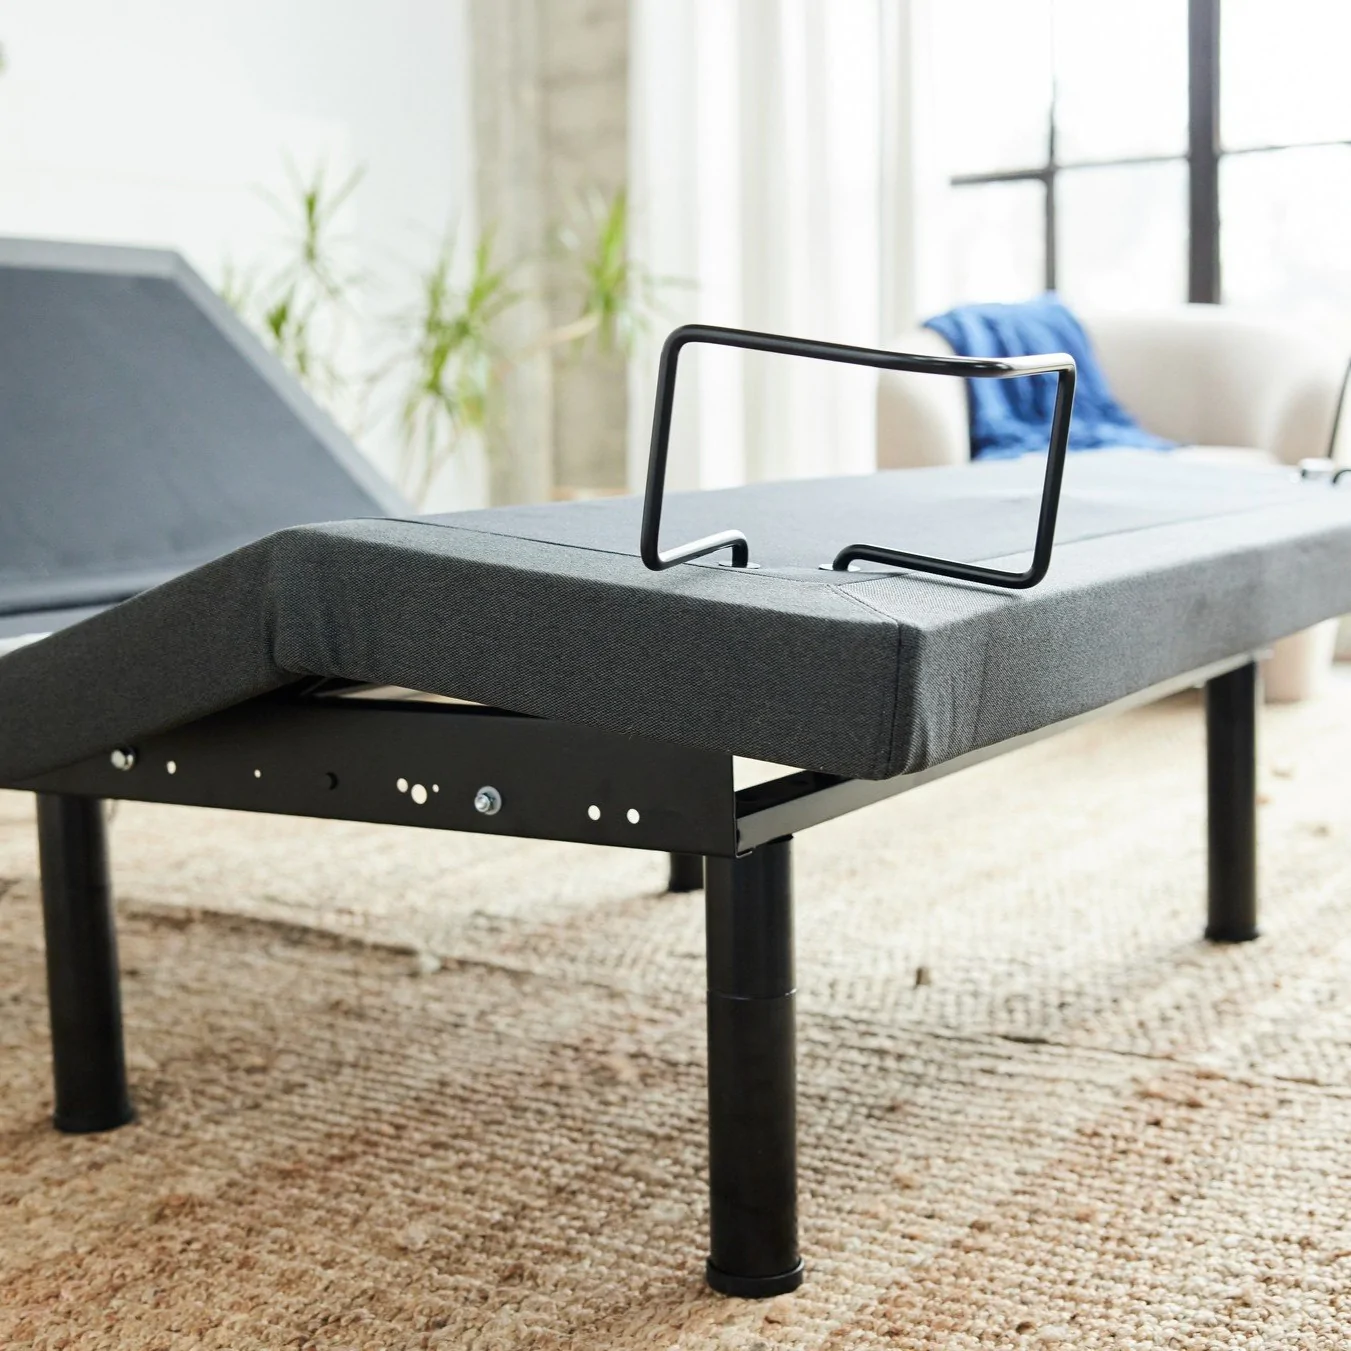 Adjustable bed mase with gray fabric and black metal stands on beige carpet in airy room